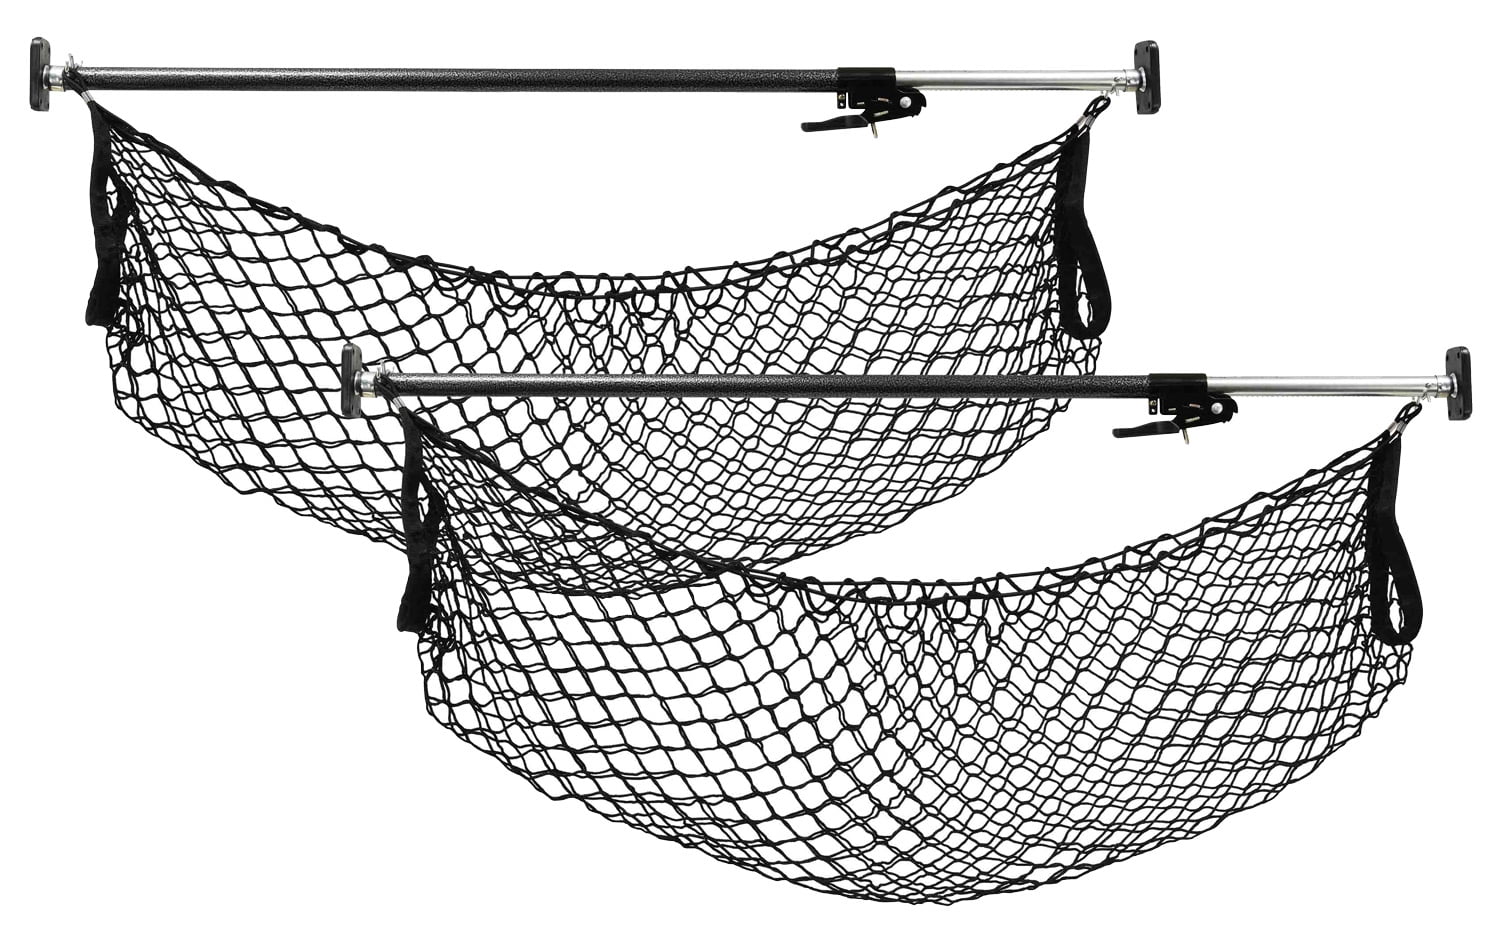 Ratcheting Cargo Bar Adjustable 40 - 70 w/ Storage Net for Use in Pickup  Truck Bed, SUV, and Small Trailers (2 Pack) 